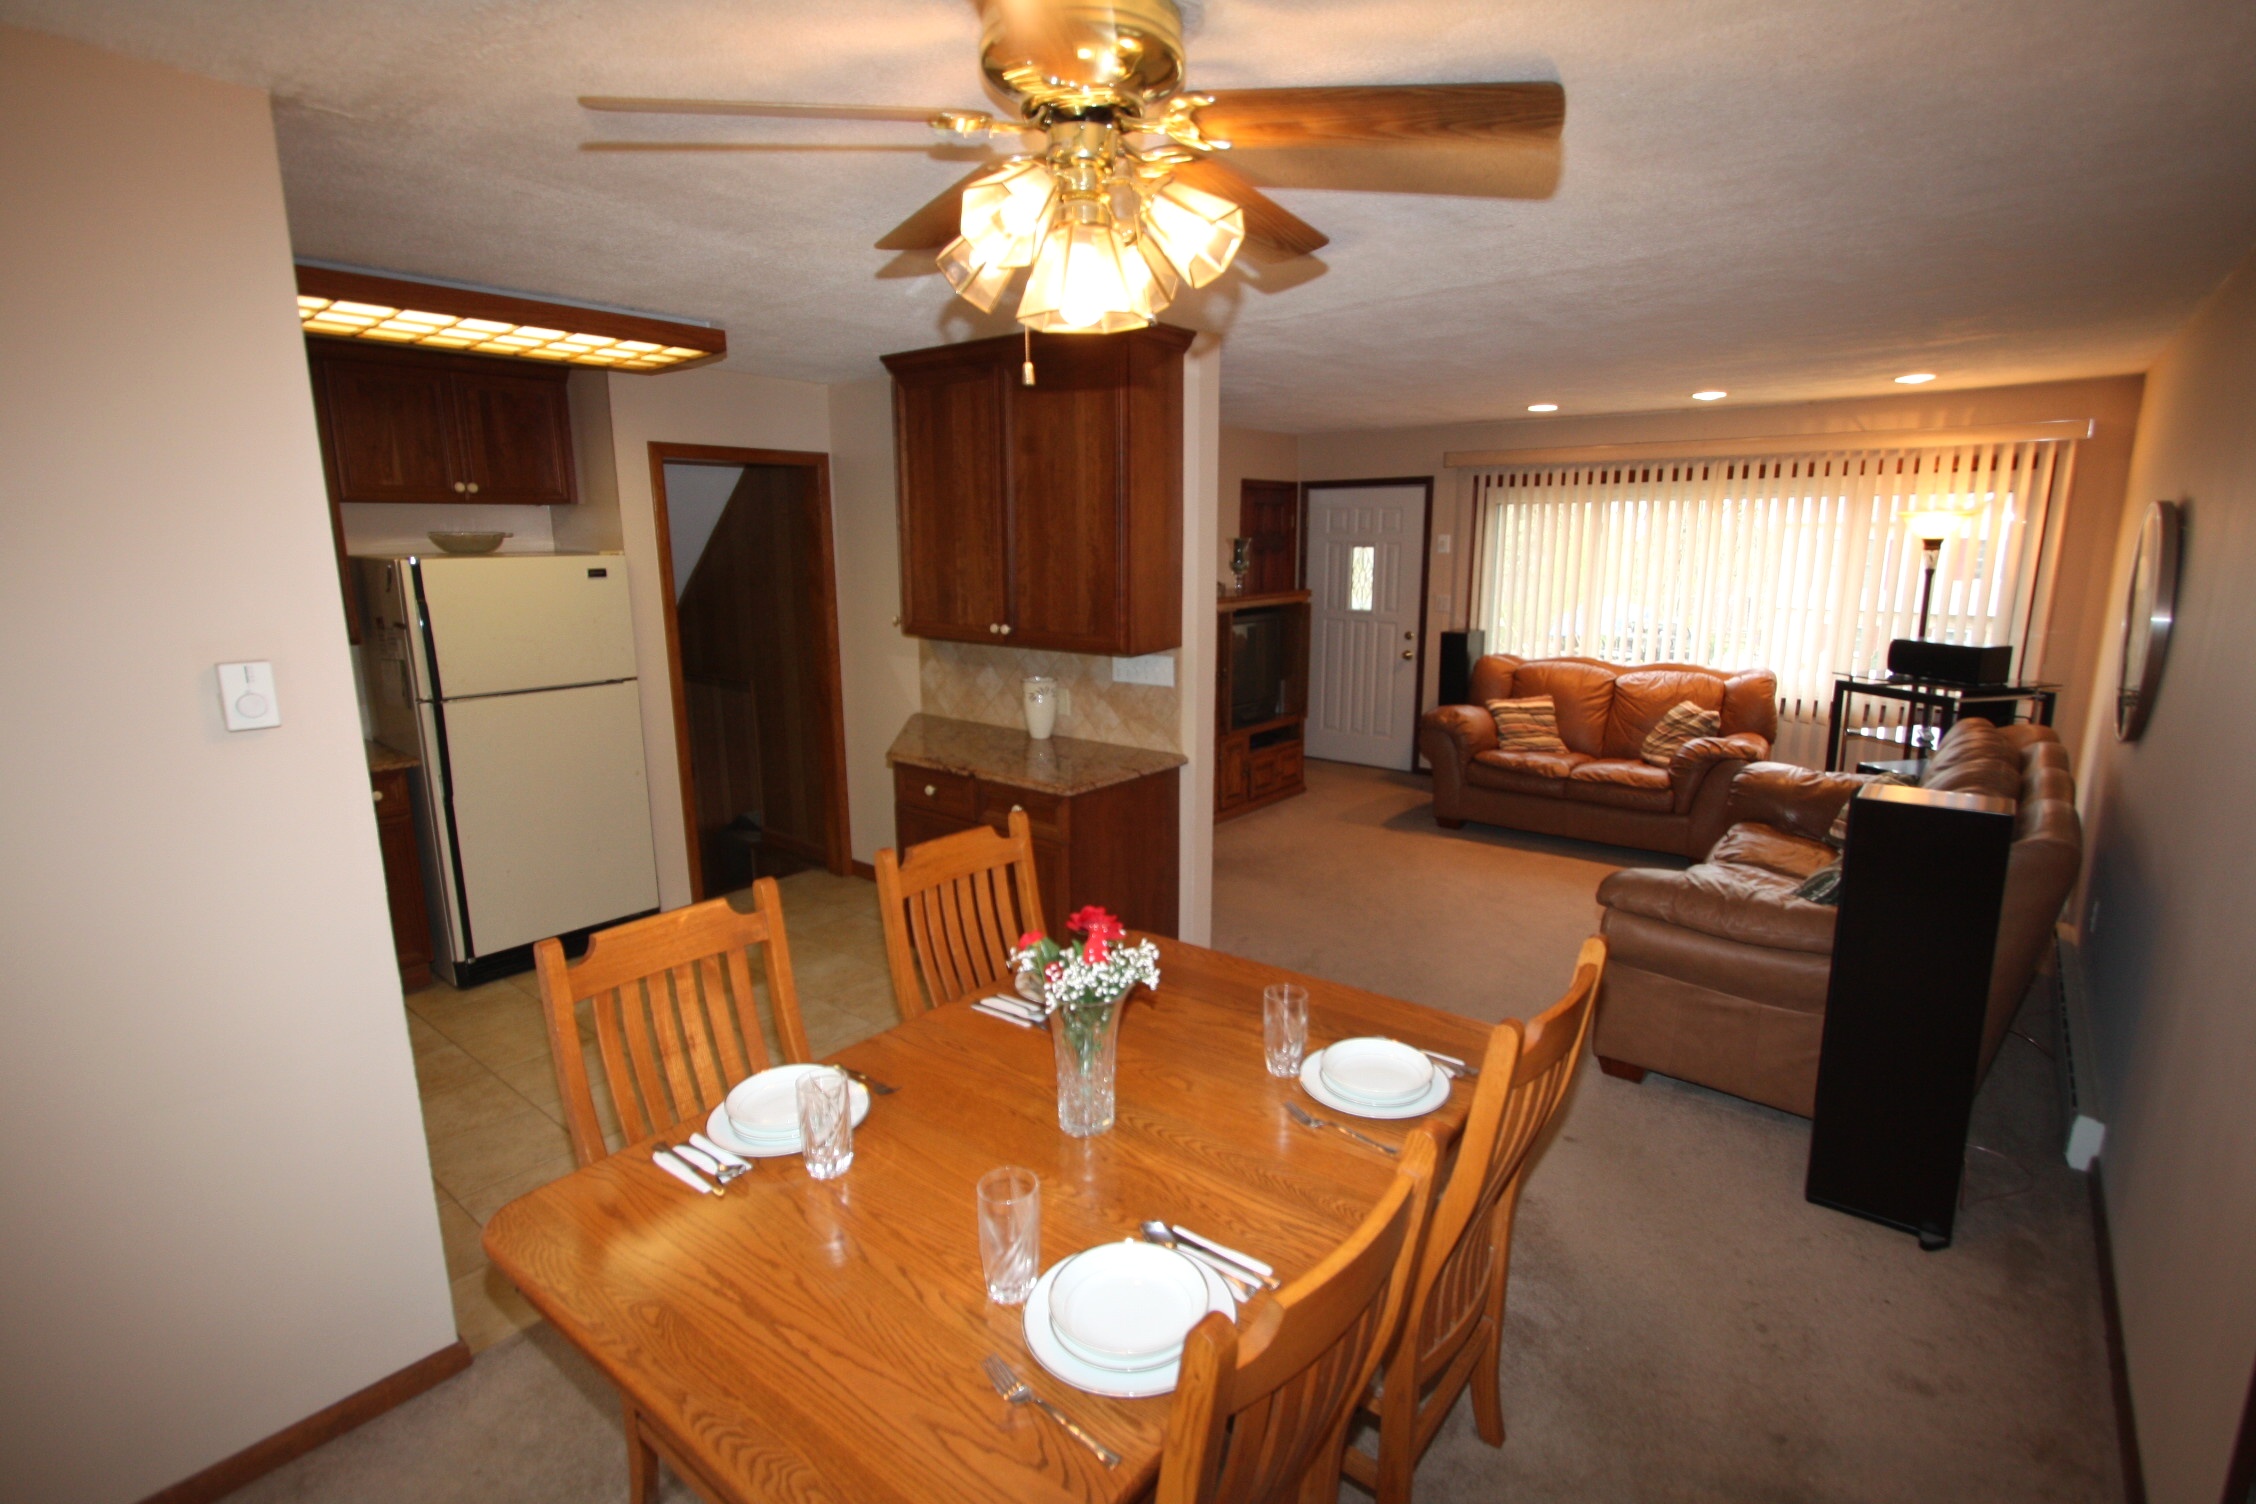 Ceiling Fan Over Dining Room Table